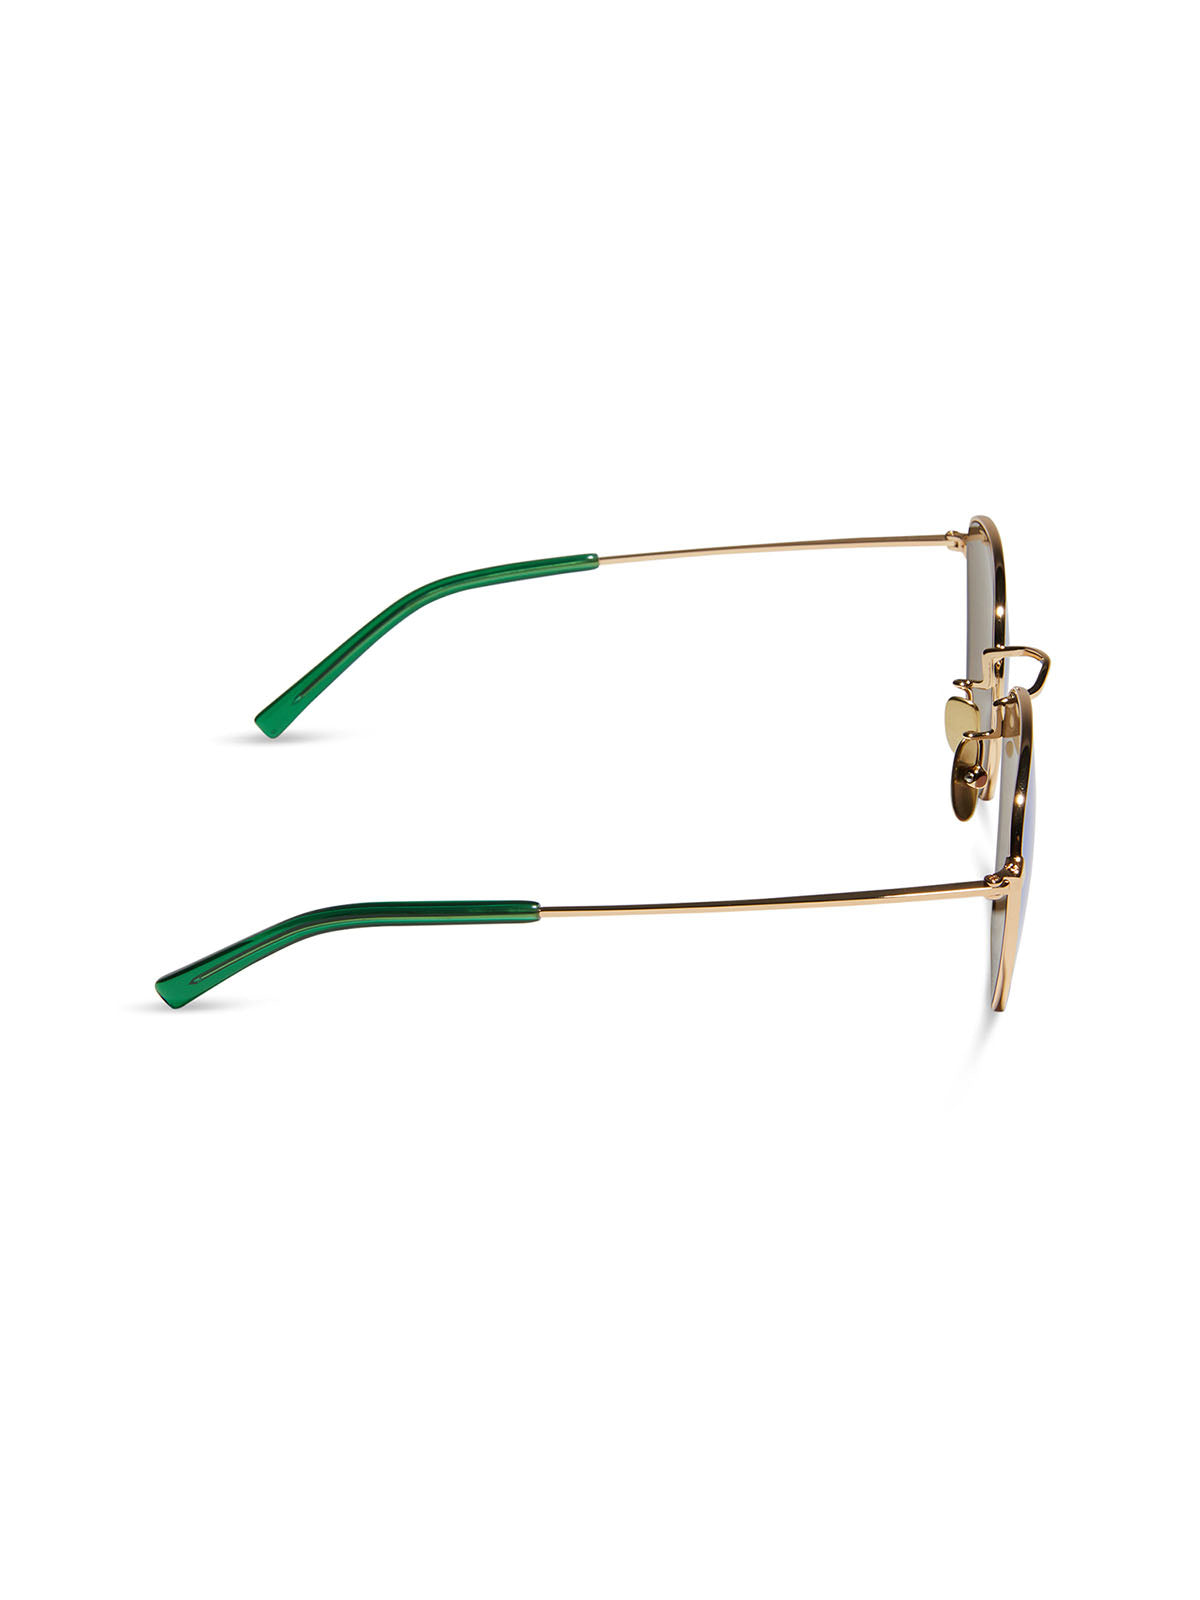 diff eyewear axel sunglasses in gold and green mirror